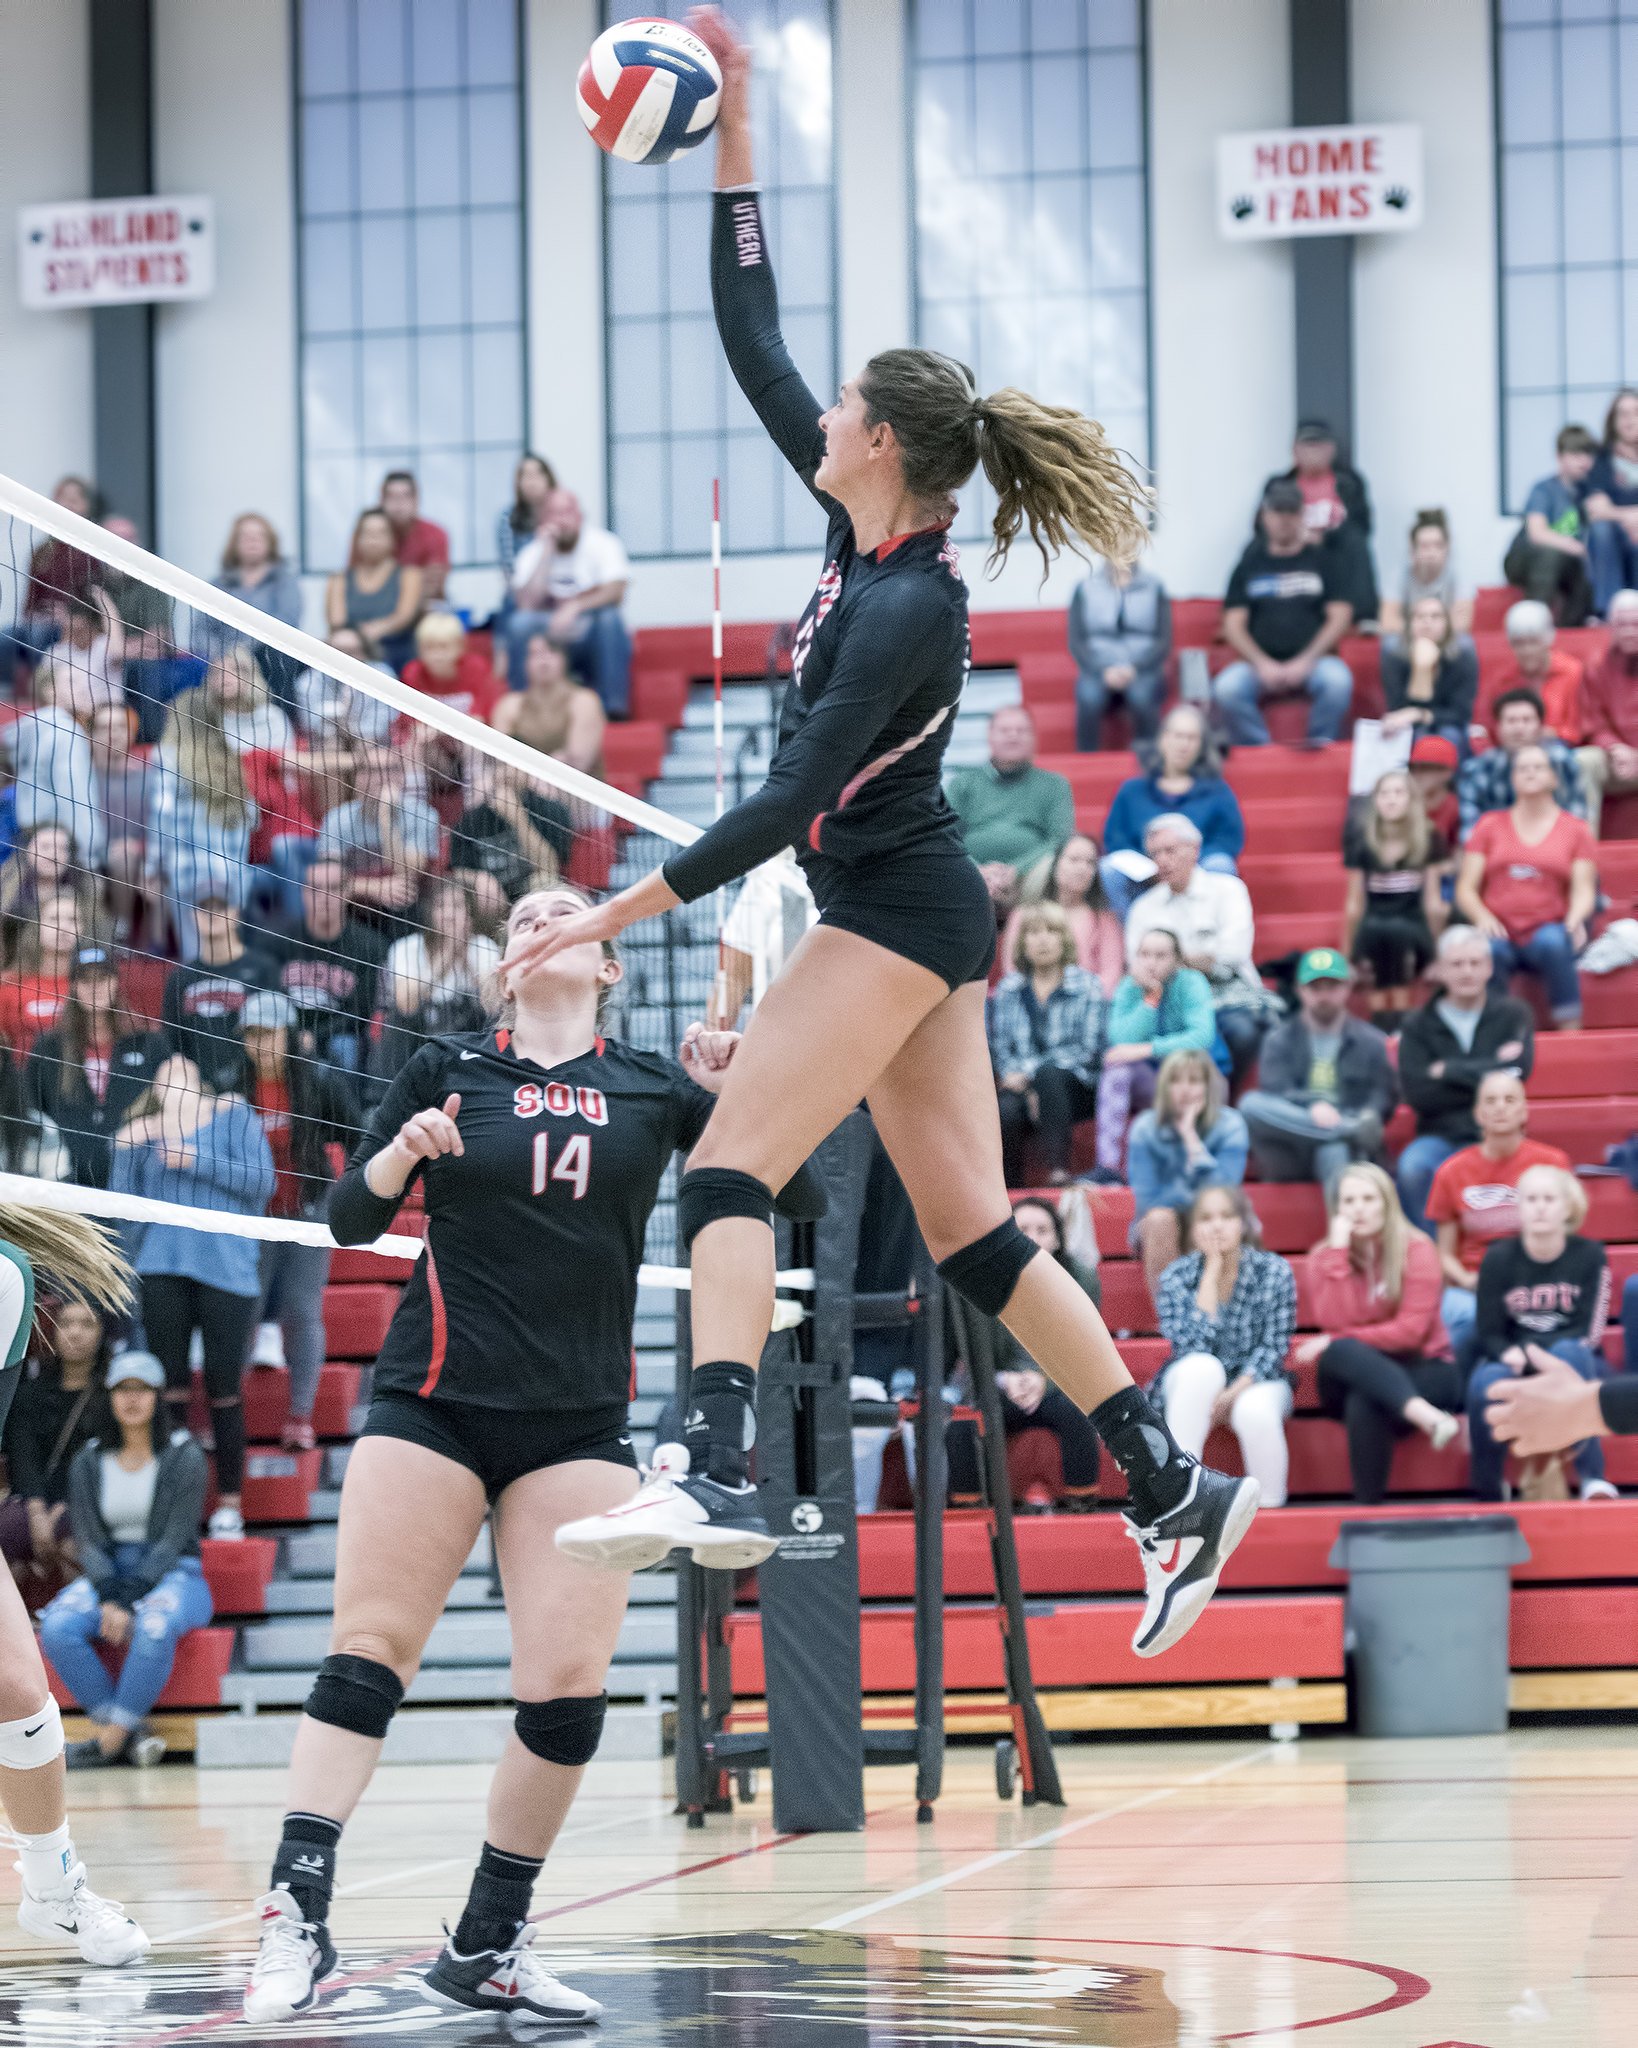 Teaching Volleyball Skills:Certain hitting volleyball drills and skills study are designed to help players develop an aggressive mindset when they go up to hit. (Al Case)